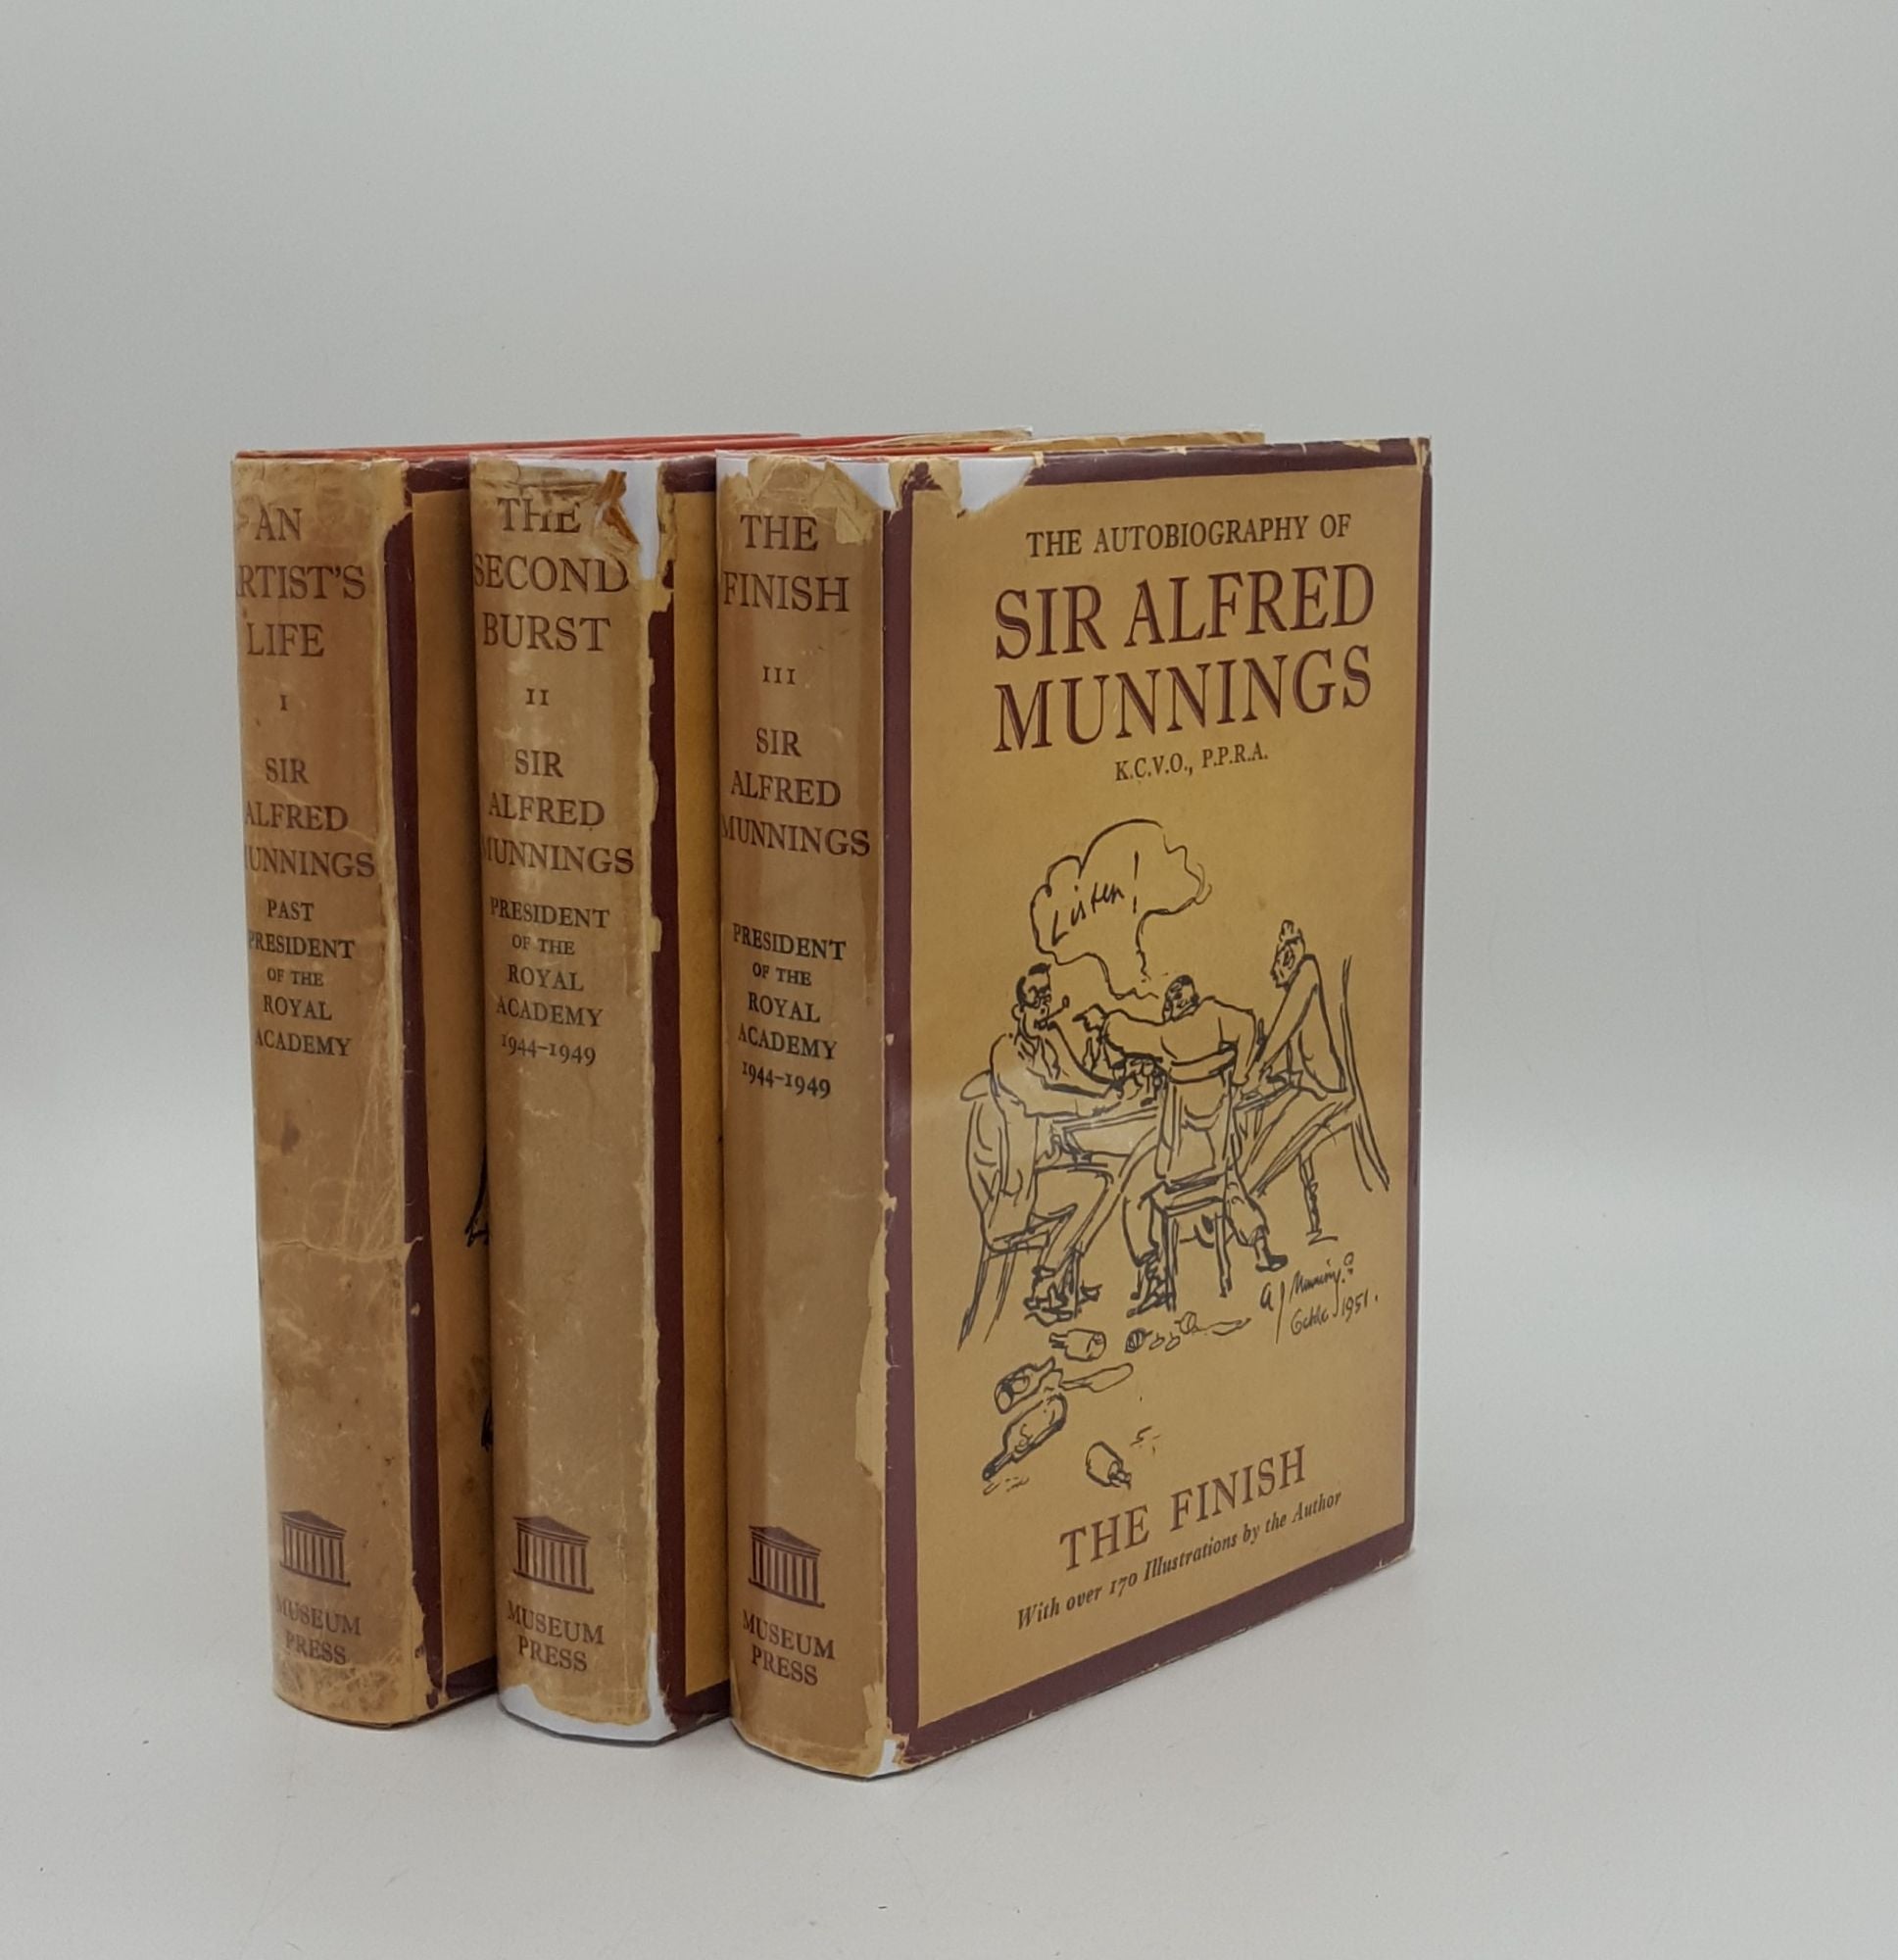 MUNNINGS Sir Alfred - The Autobiography an Artist's Life the Second Burst the Finish